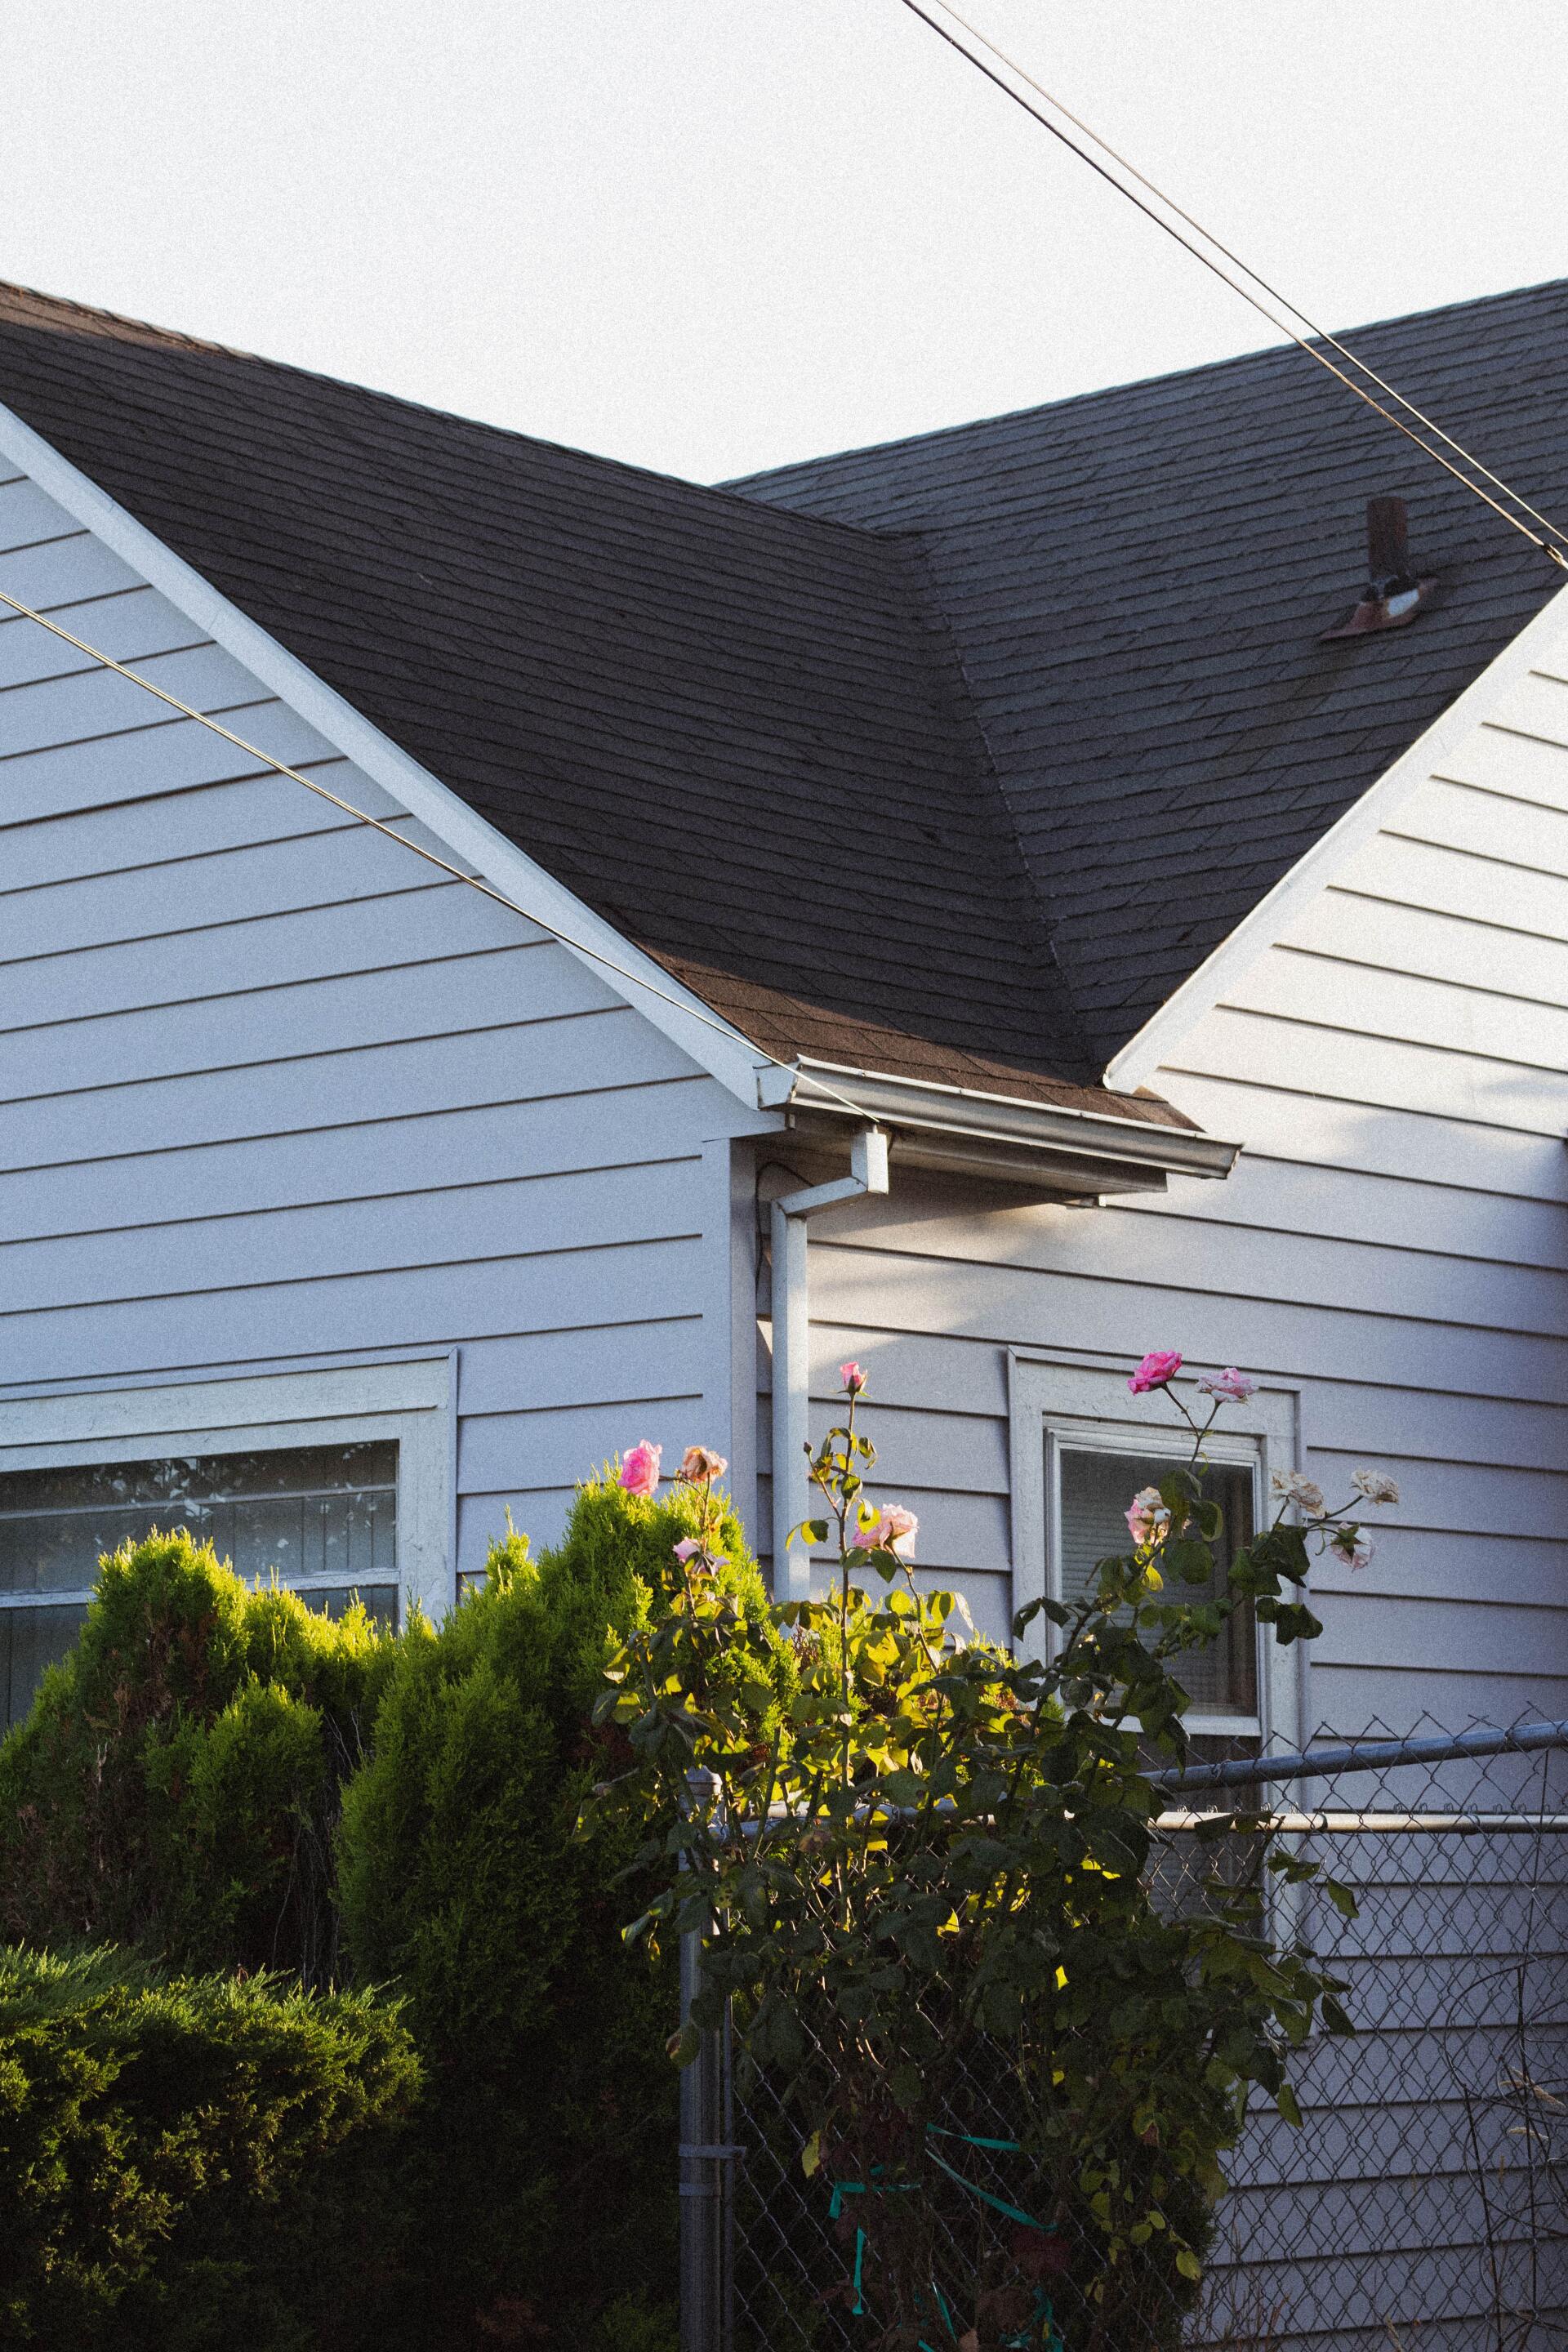 Discover how Vanderleek Roofing, with over 25 years of experience, provides top-notch roofing